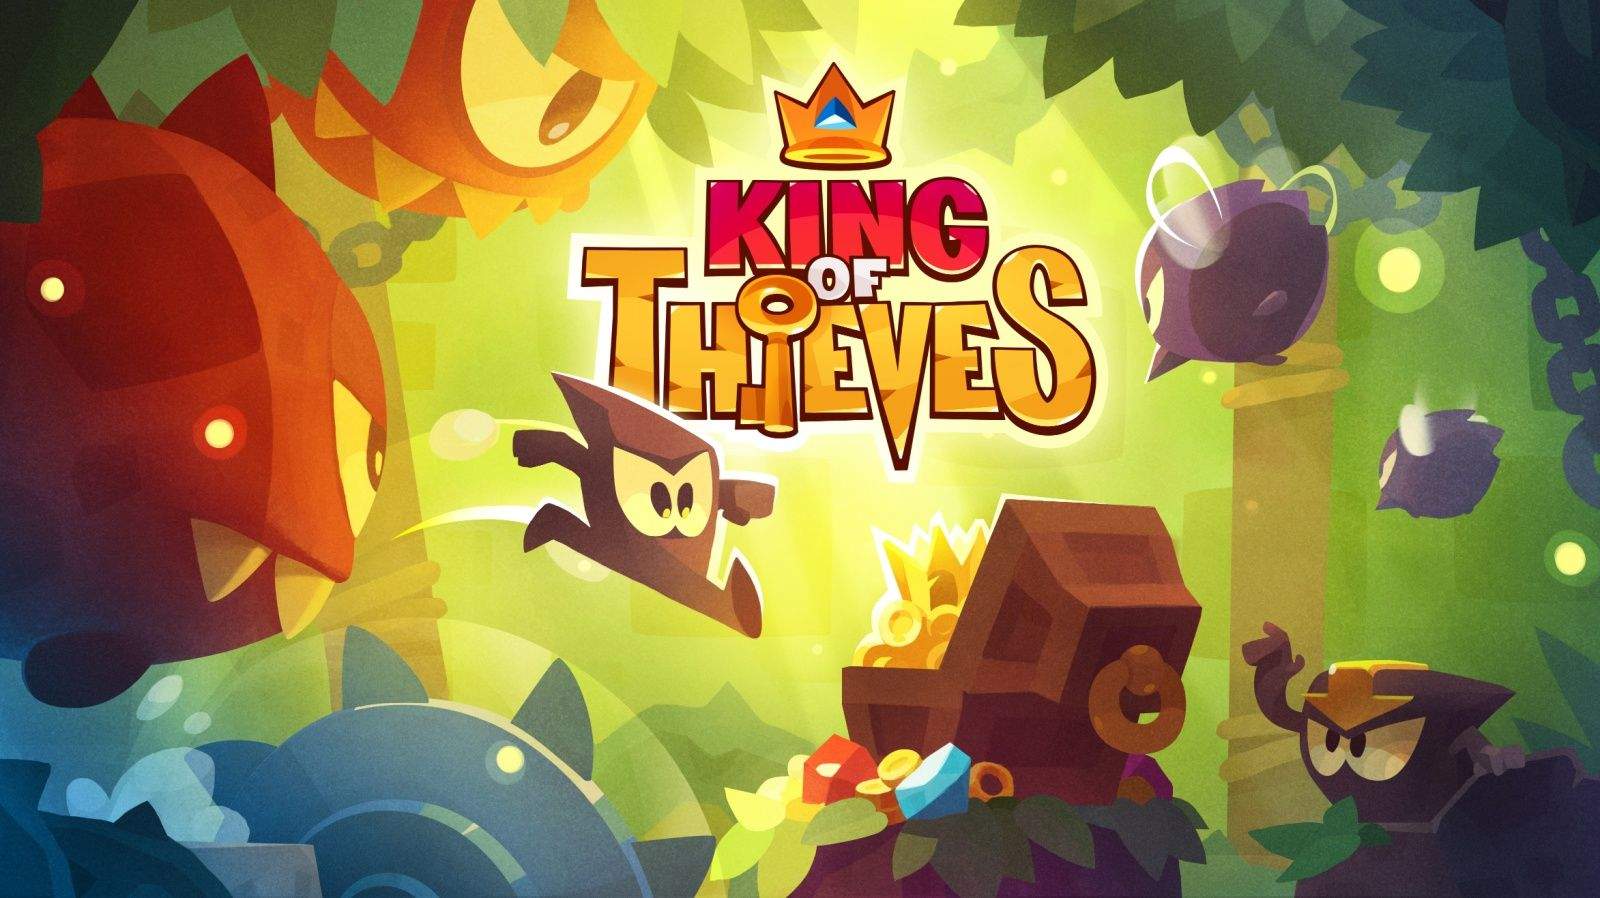 King Of Thieves The Addictive New Game From The Makers Of Cut The Rope Cult Of Mac